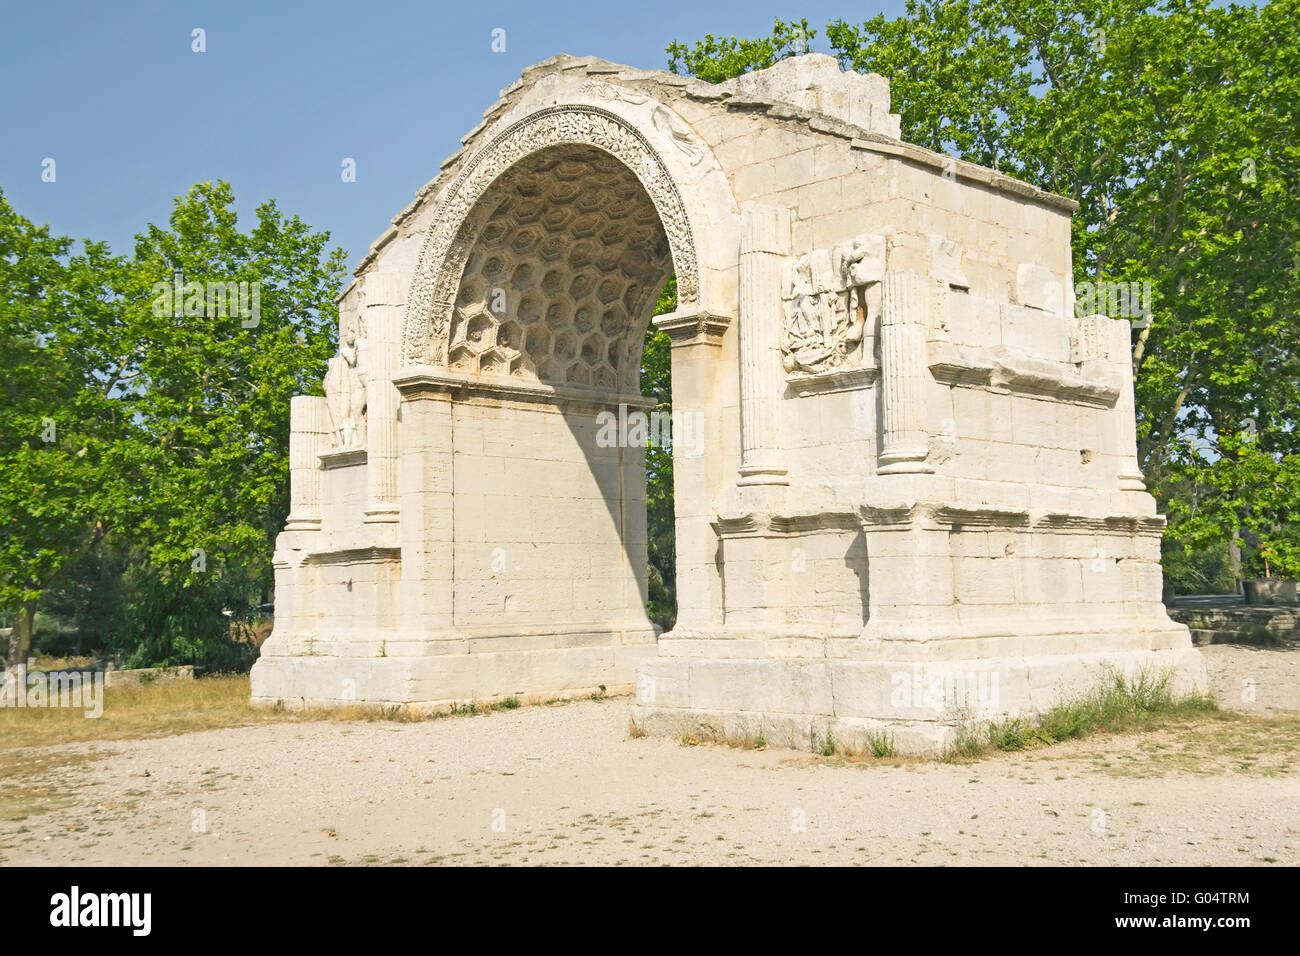 Triumphal arch in Glanum.  Roman city situated south of Saint-Remy-de-Provence France. Stock Photo